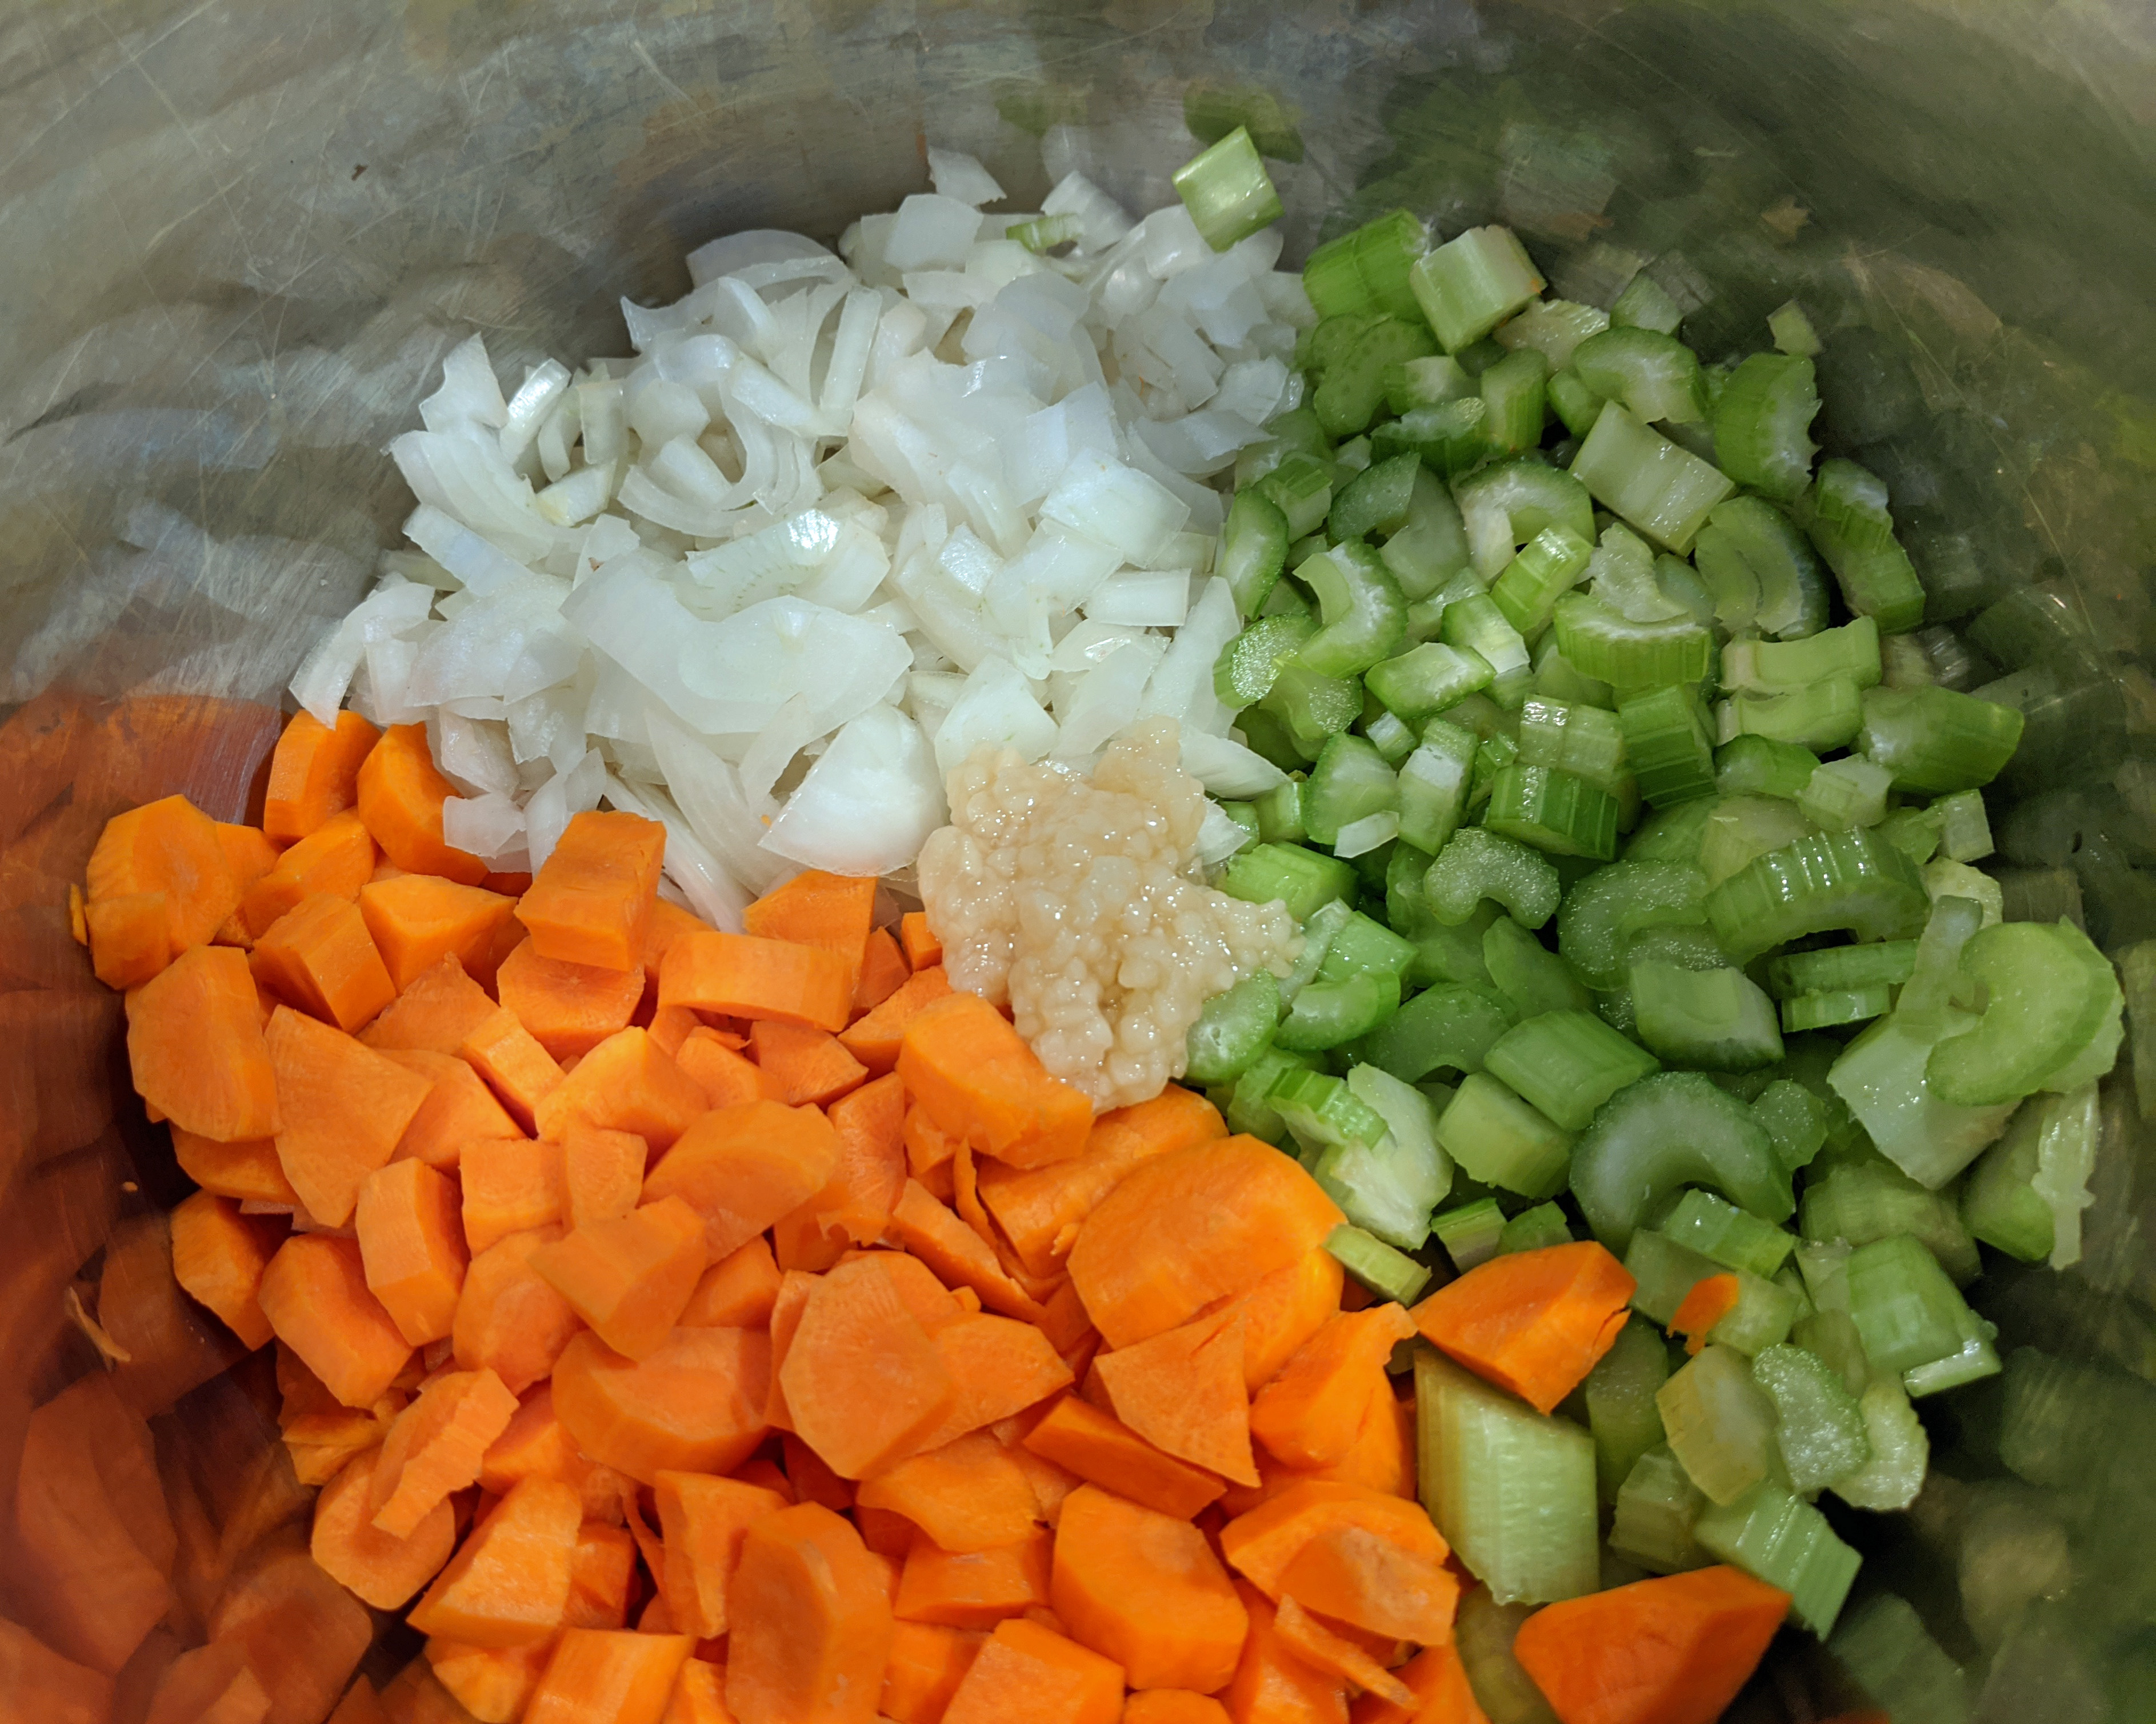 chopped onions, carrots, celery and garlic